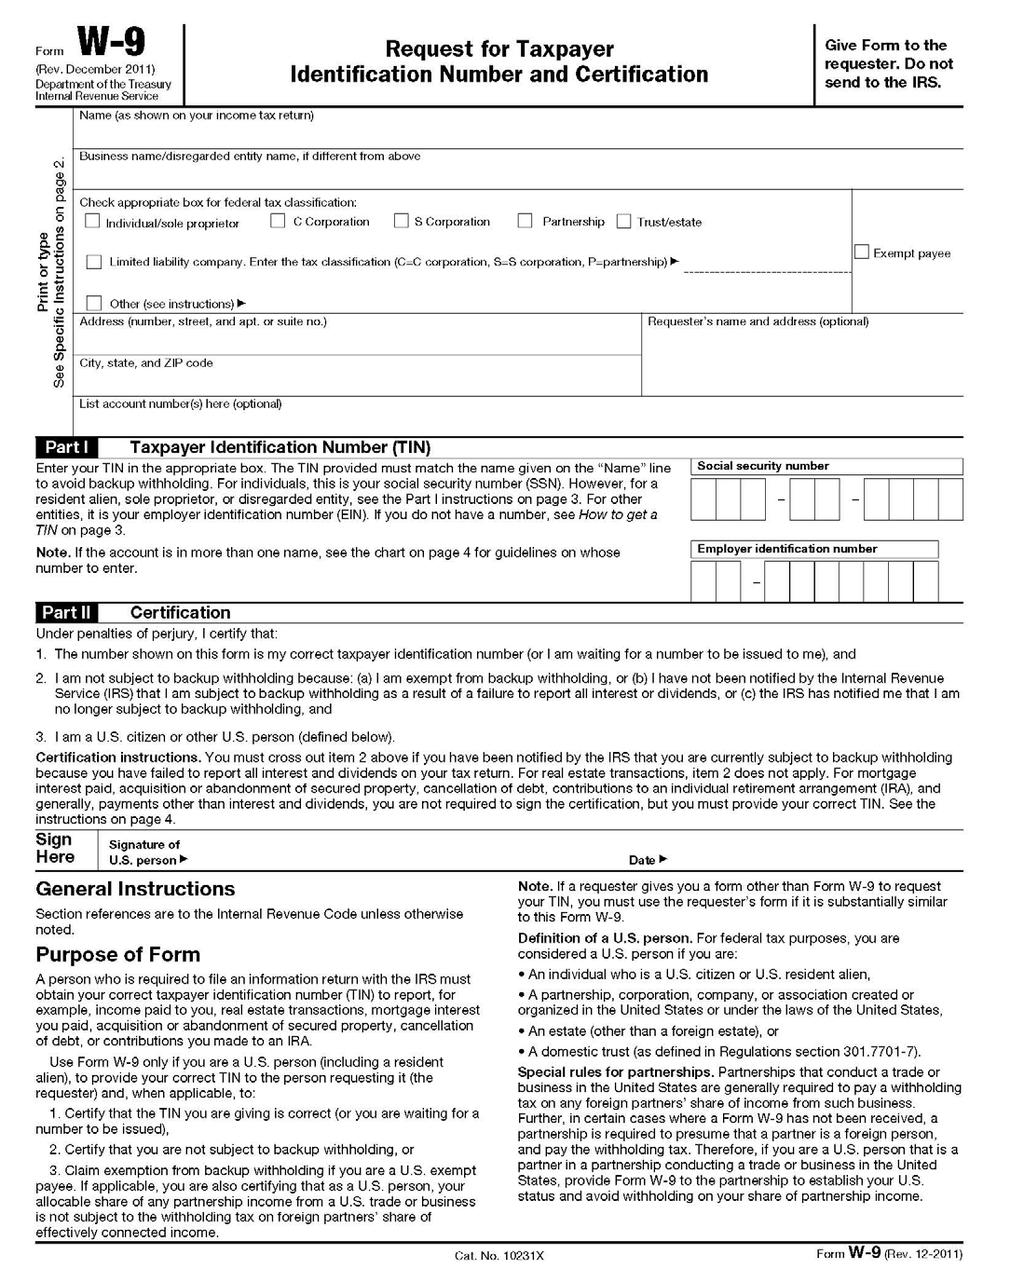 ATTACHMENT D This form can be completed and printed